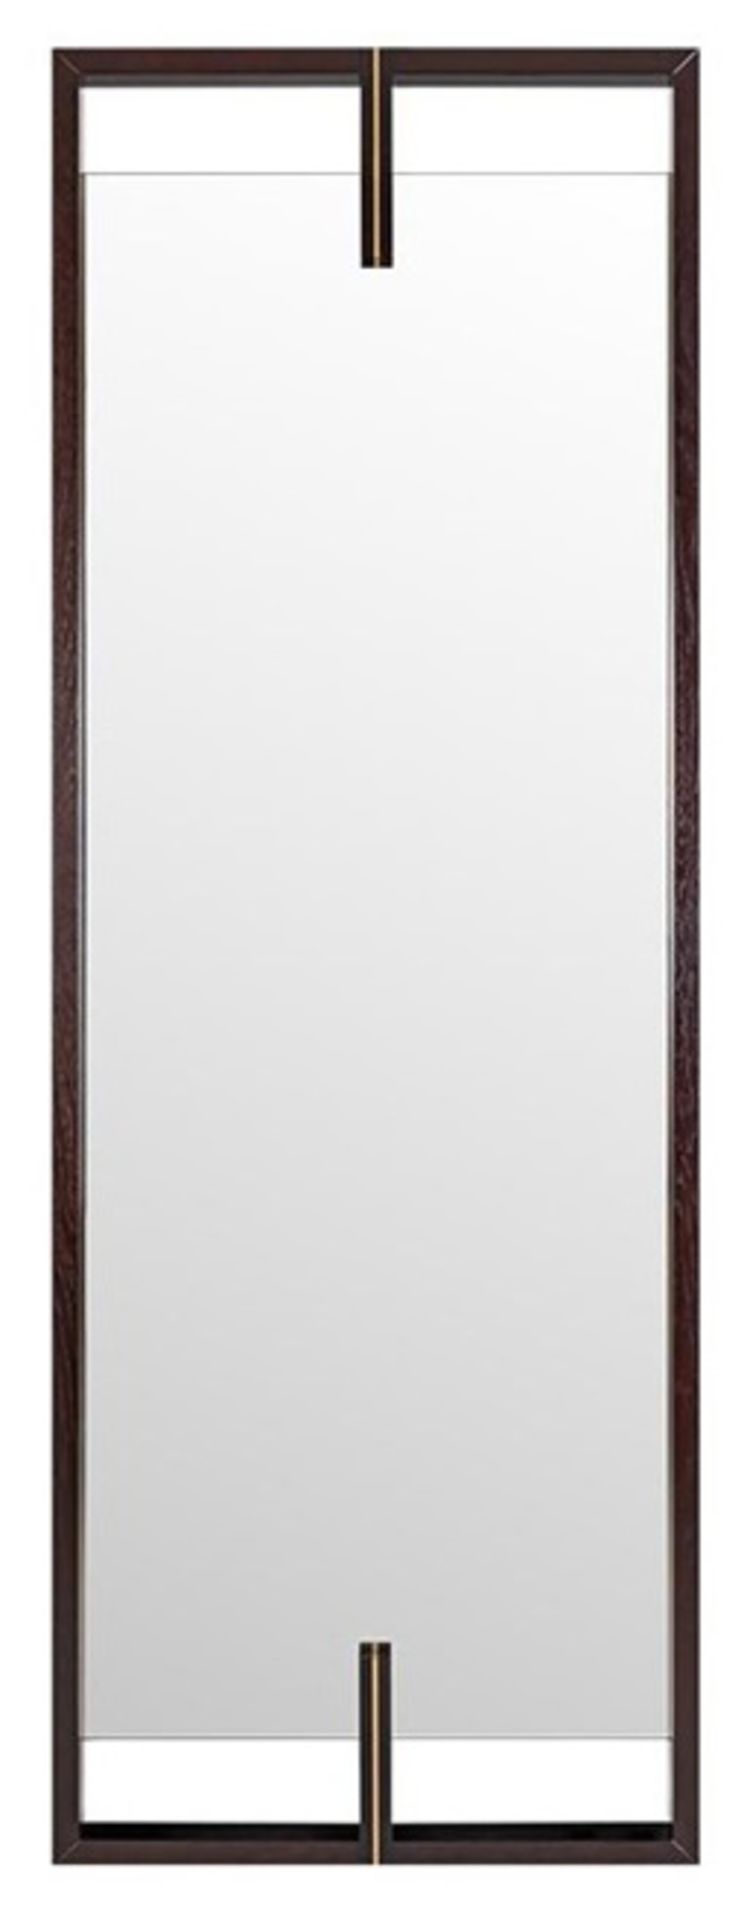 1 x FRATO Lancaster Luxury Mirror With Dark Wood Frame And Brushed Brass Details - RRP £1,288 - Image 3 of 7